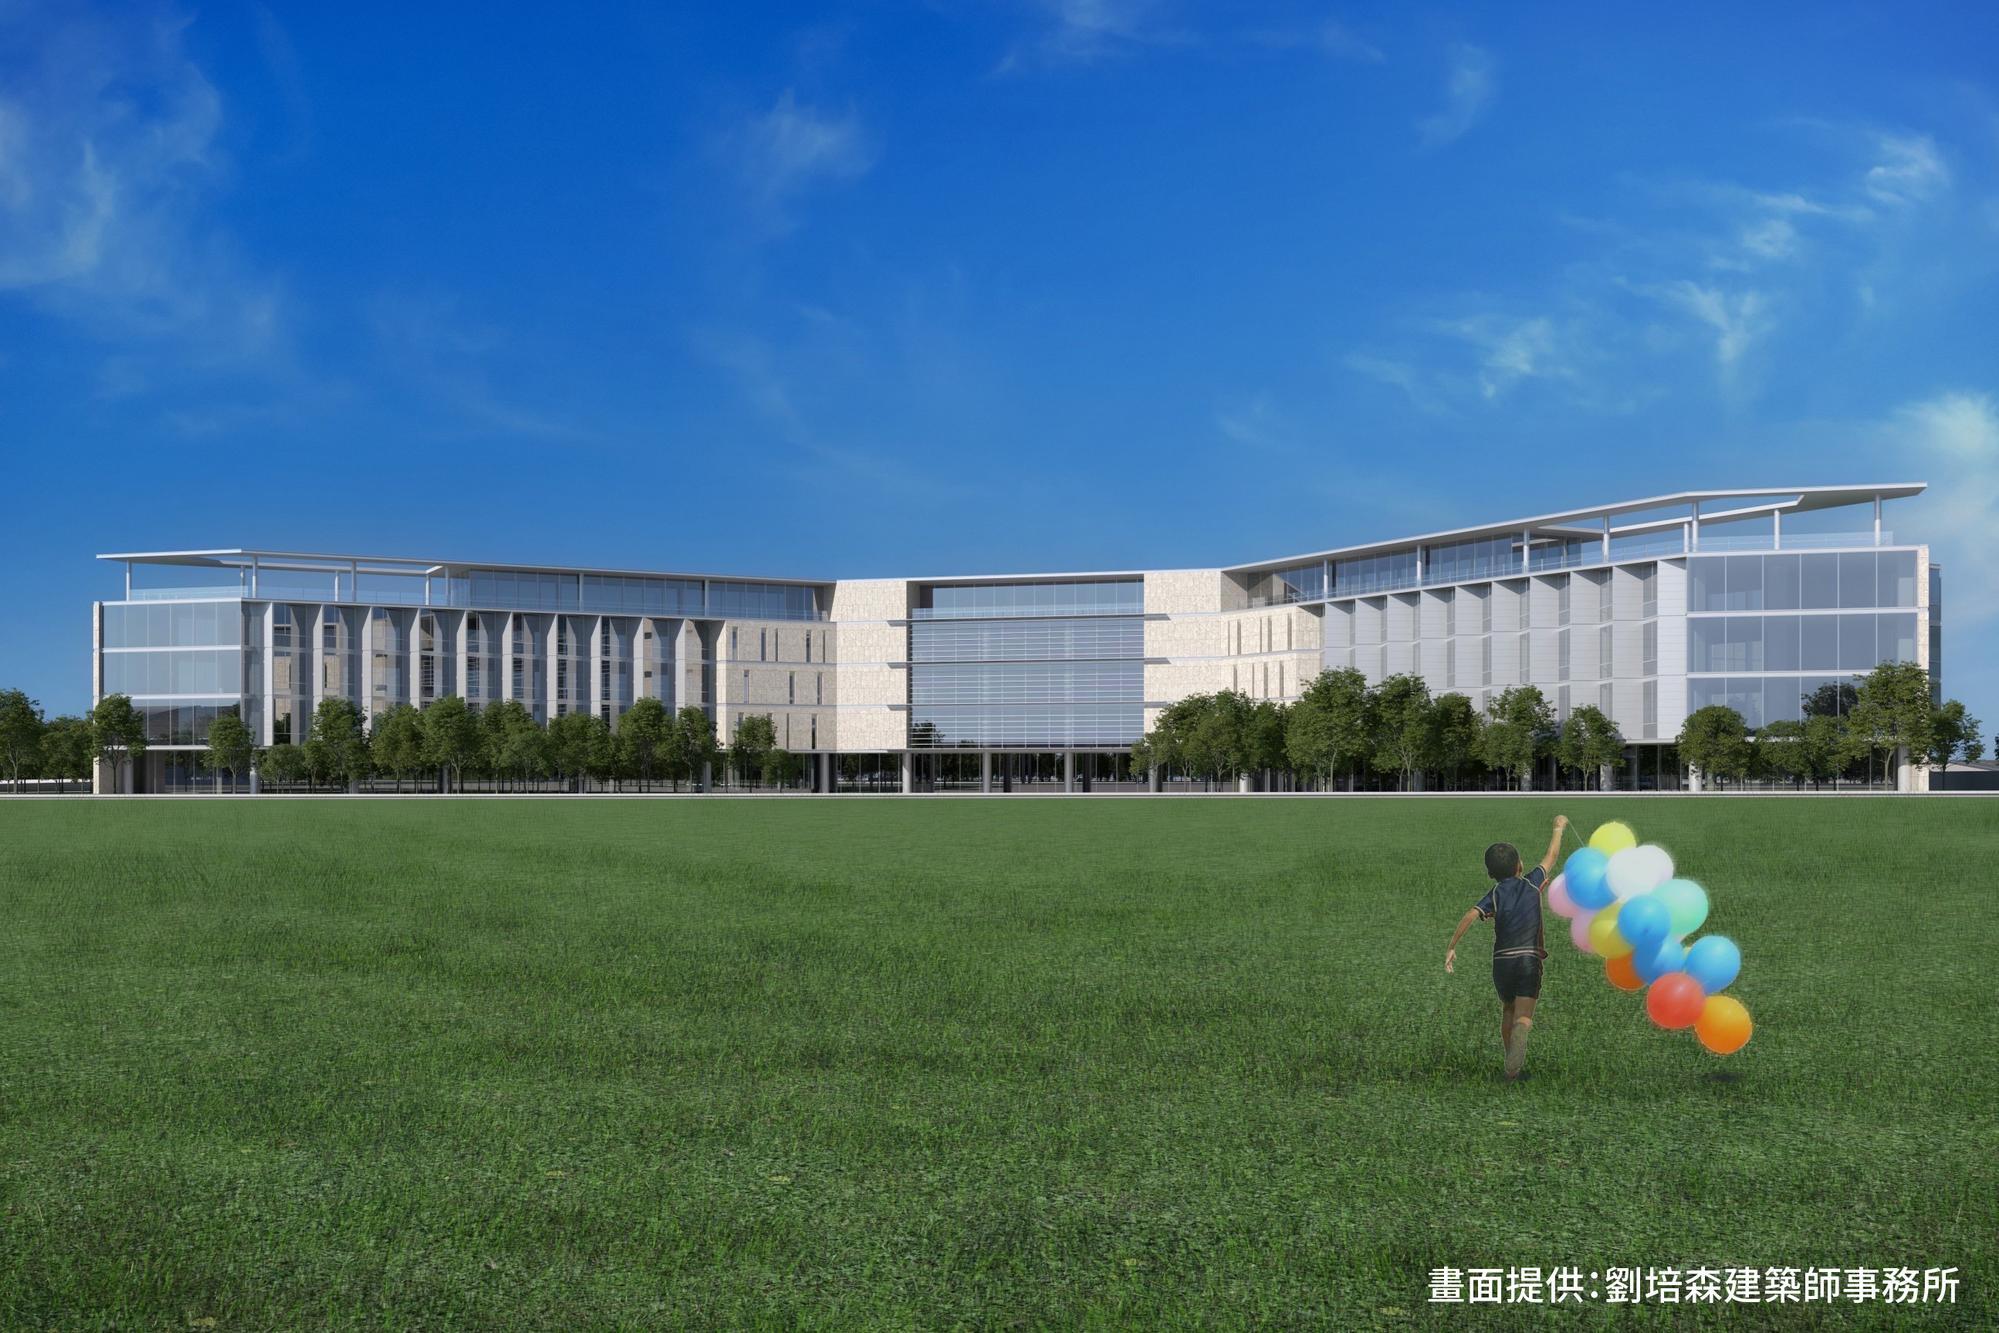 Simulated image of the NTHU Hospital. (Picture courtesy of Ricky Liu & Associates Architects+Planners)